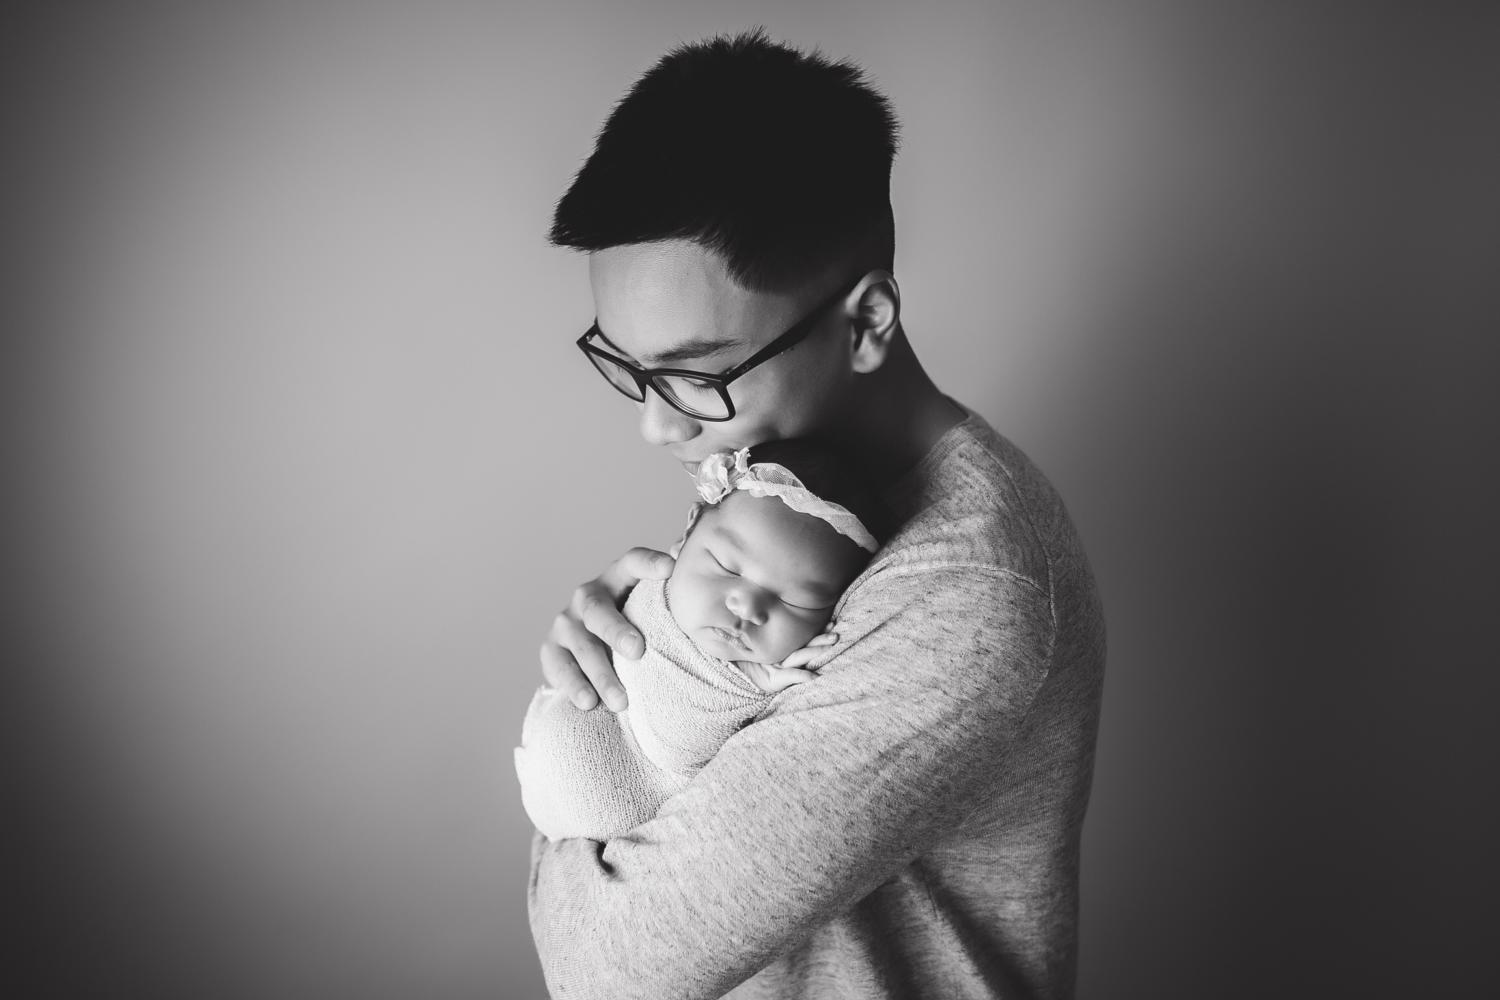 Michael del Rosario, posing with baby sister, will attend Northwestern University, majoring in journalism and computer science.